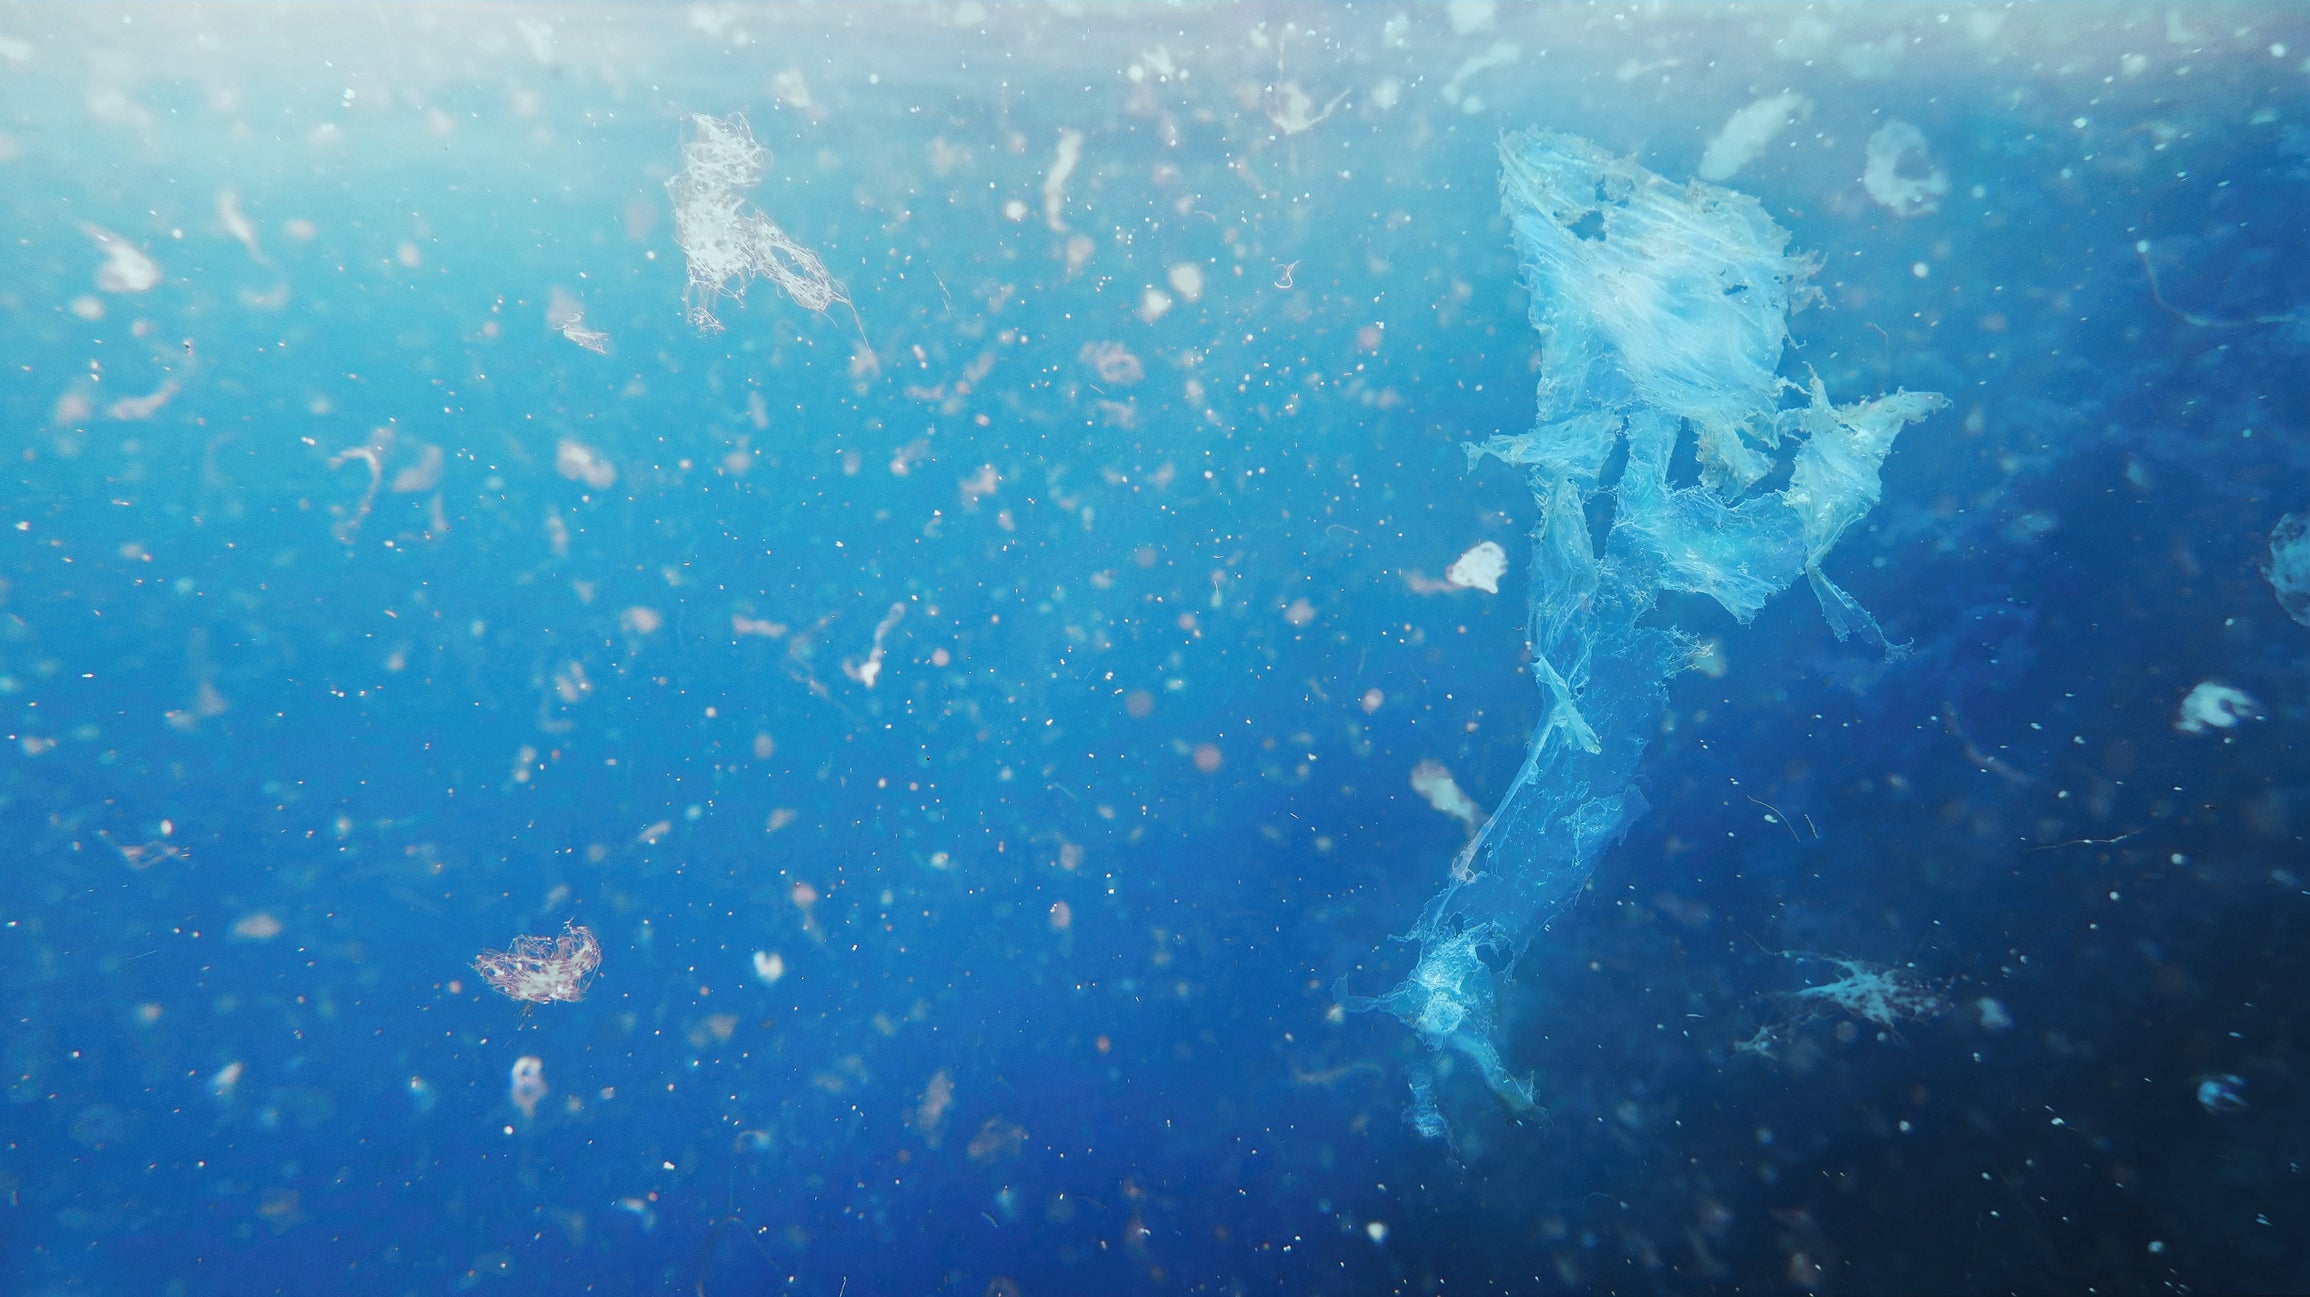 Particles of plastic drift under blue water in the ocean